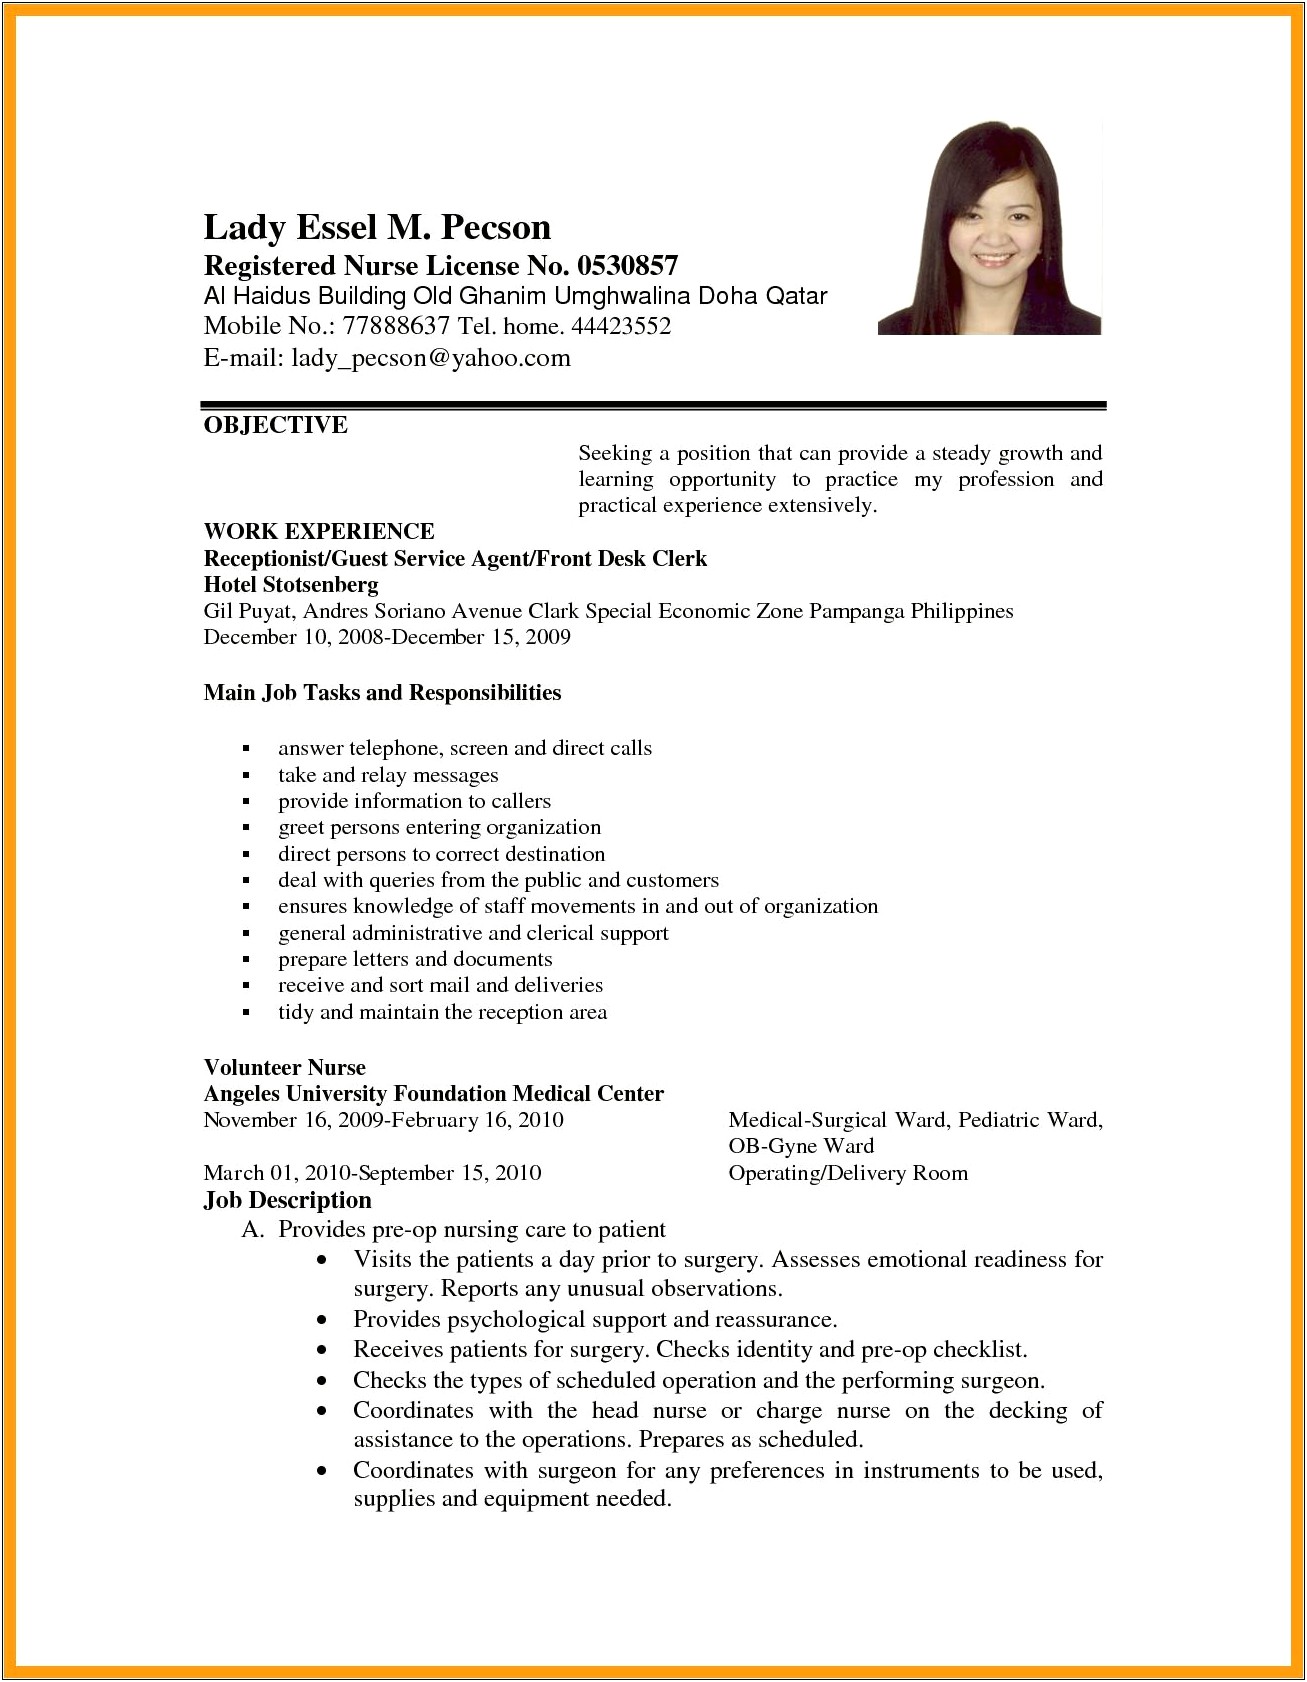 Resume Experience In A Lot Of Area